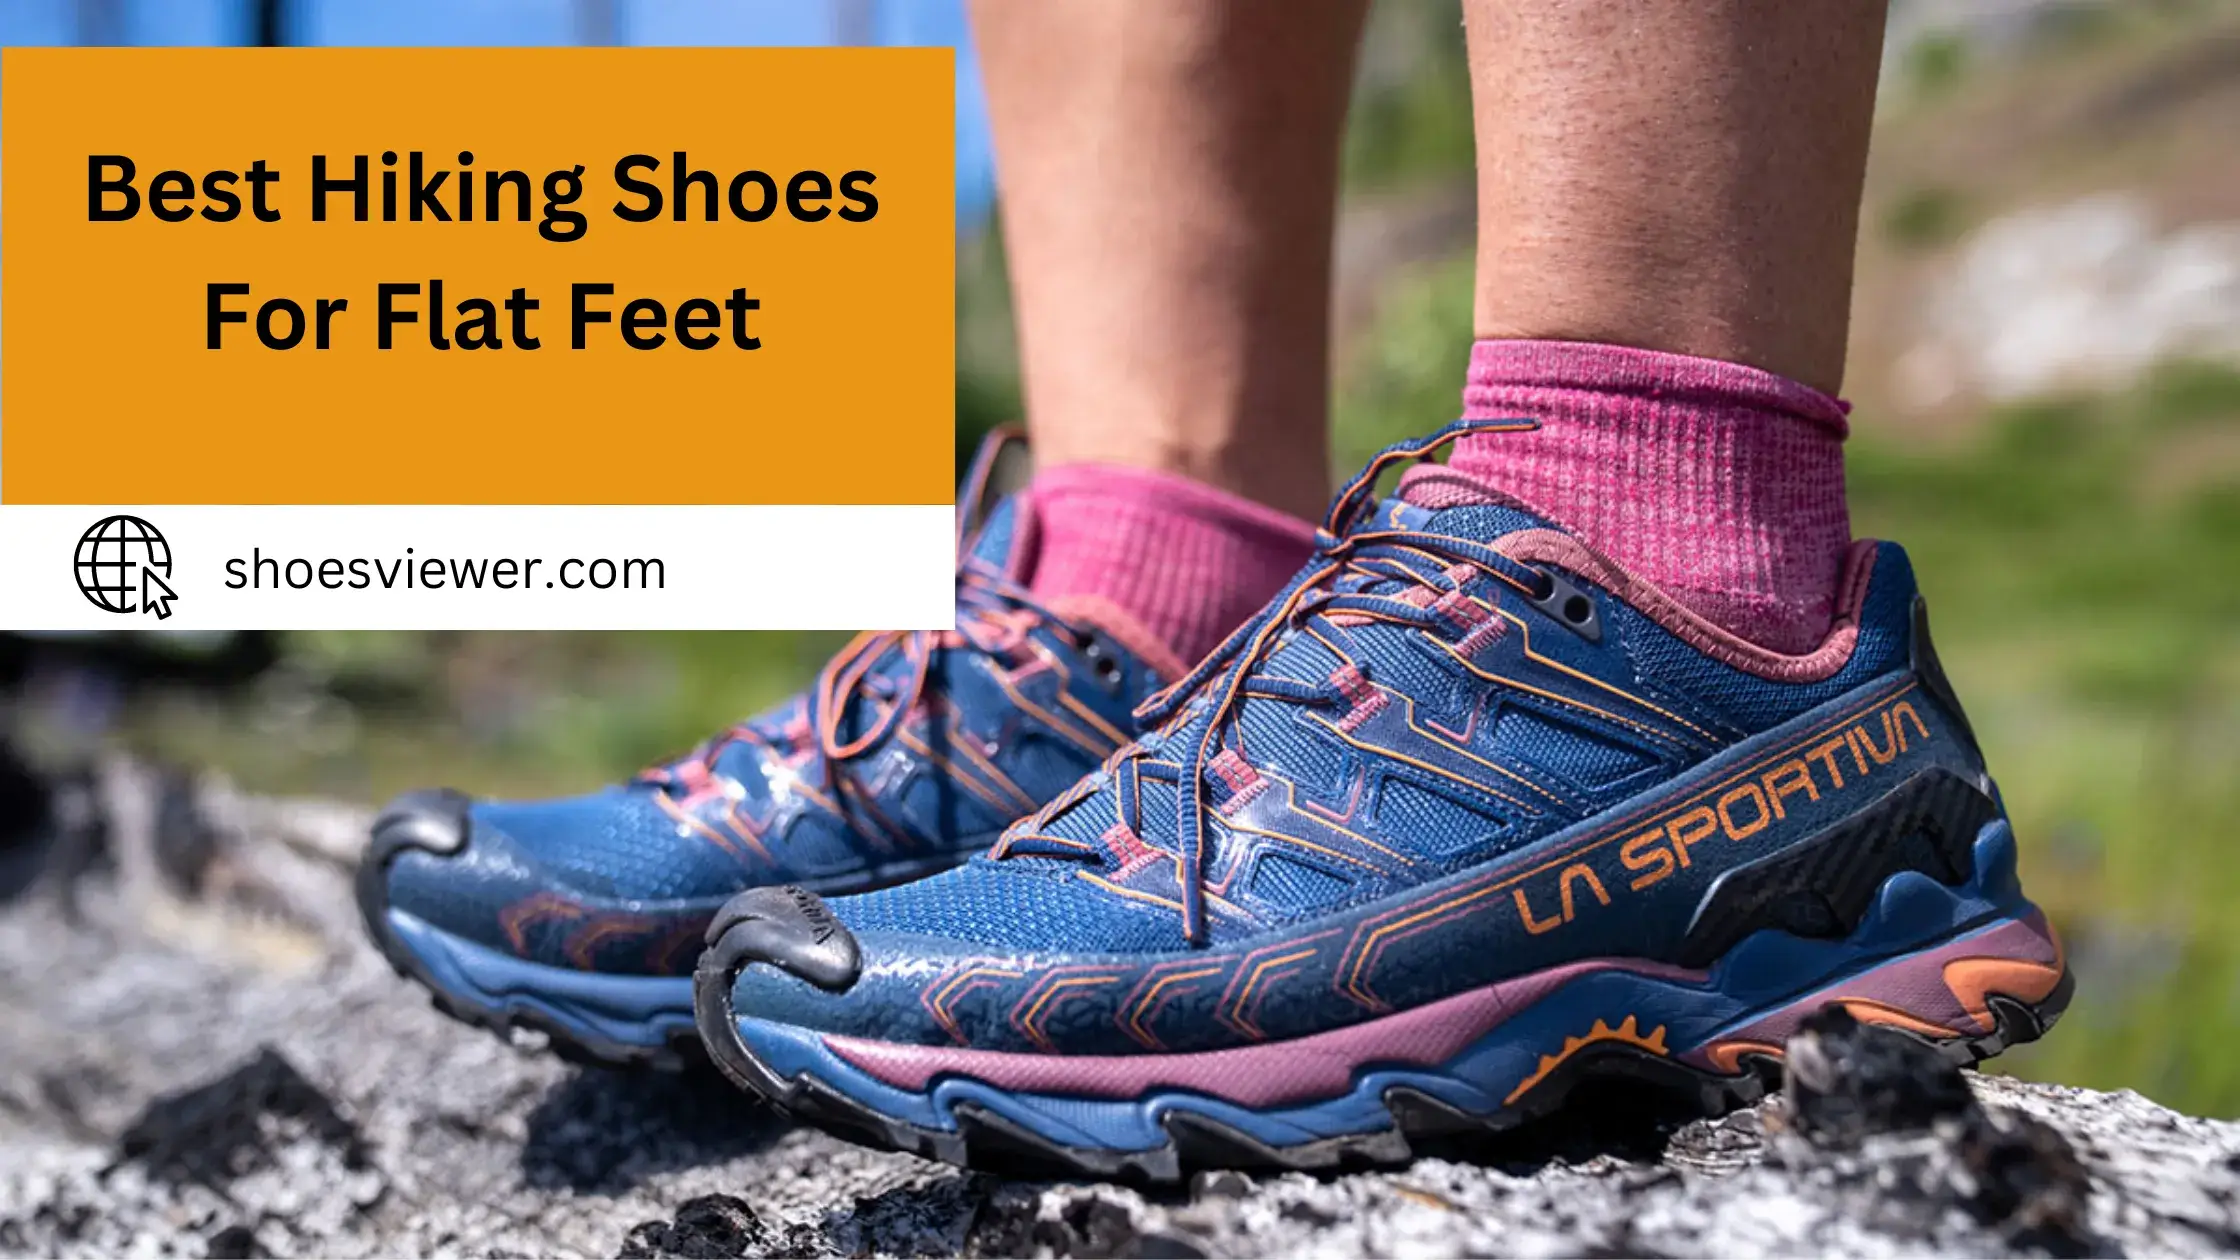 Best Hiking Shoes For Flat Feet - A Comprehensive Guide